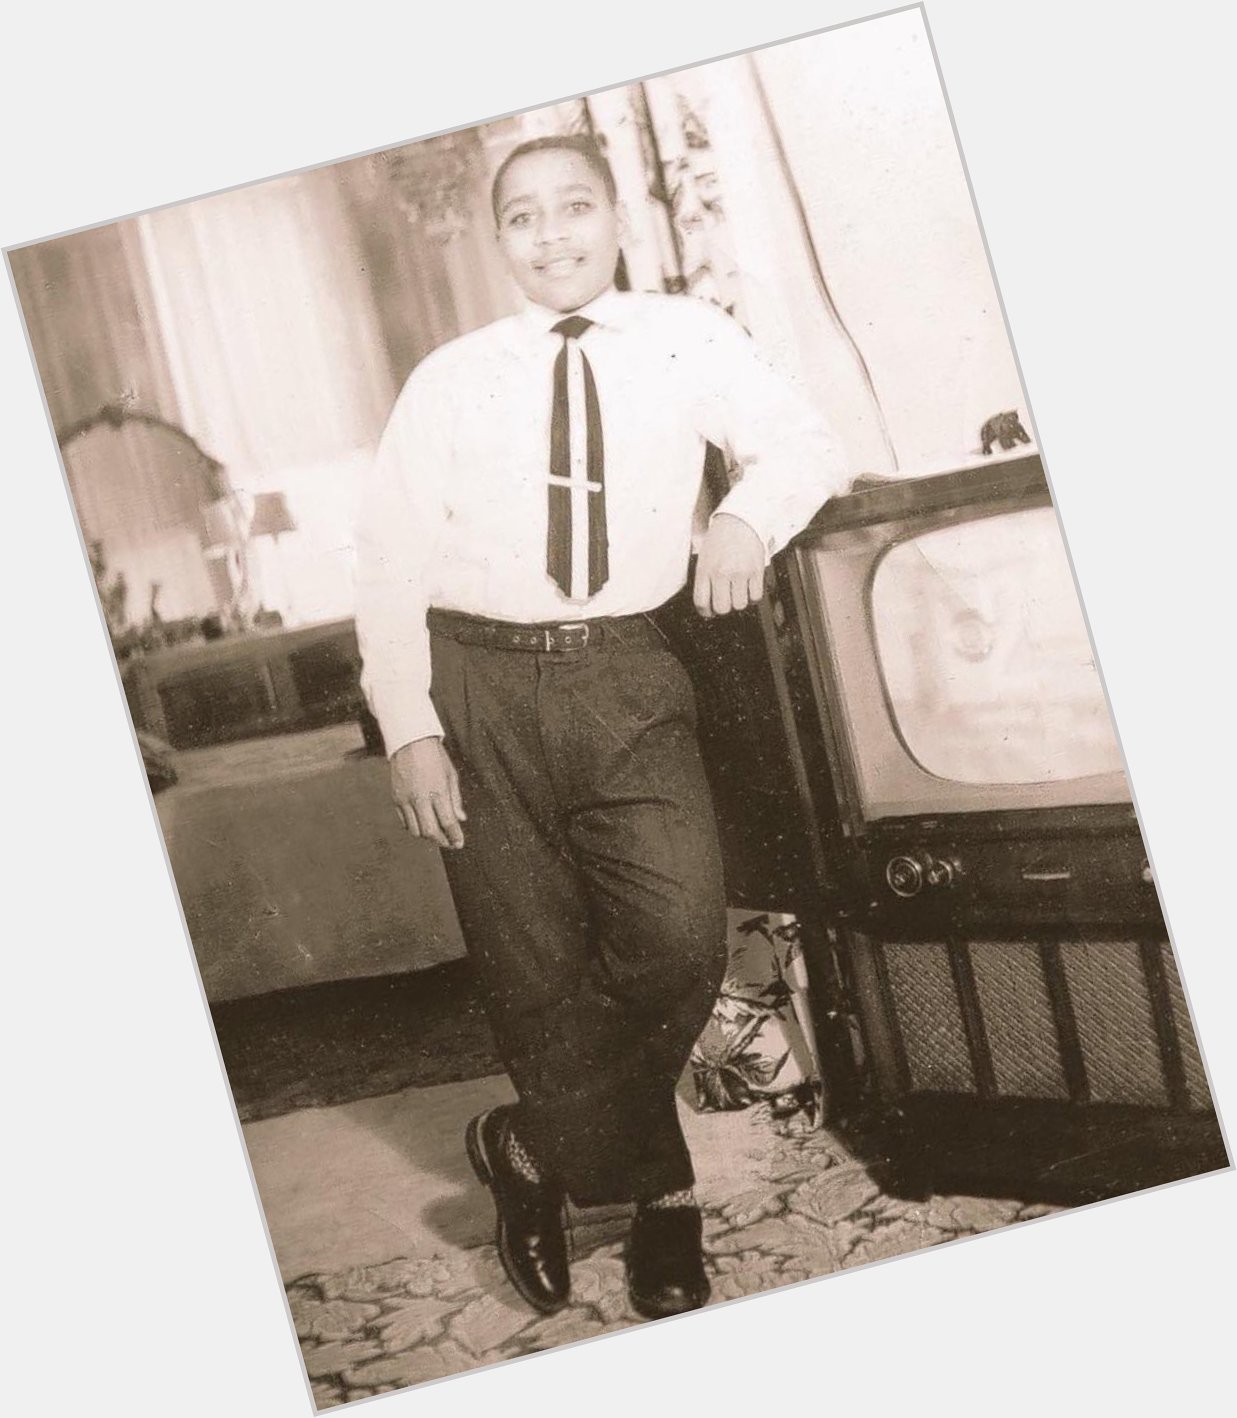 Emmett Till was just 14 when he was brutally murdered. He would be 79 today, happy birthday 